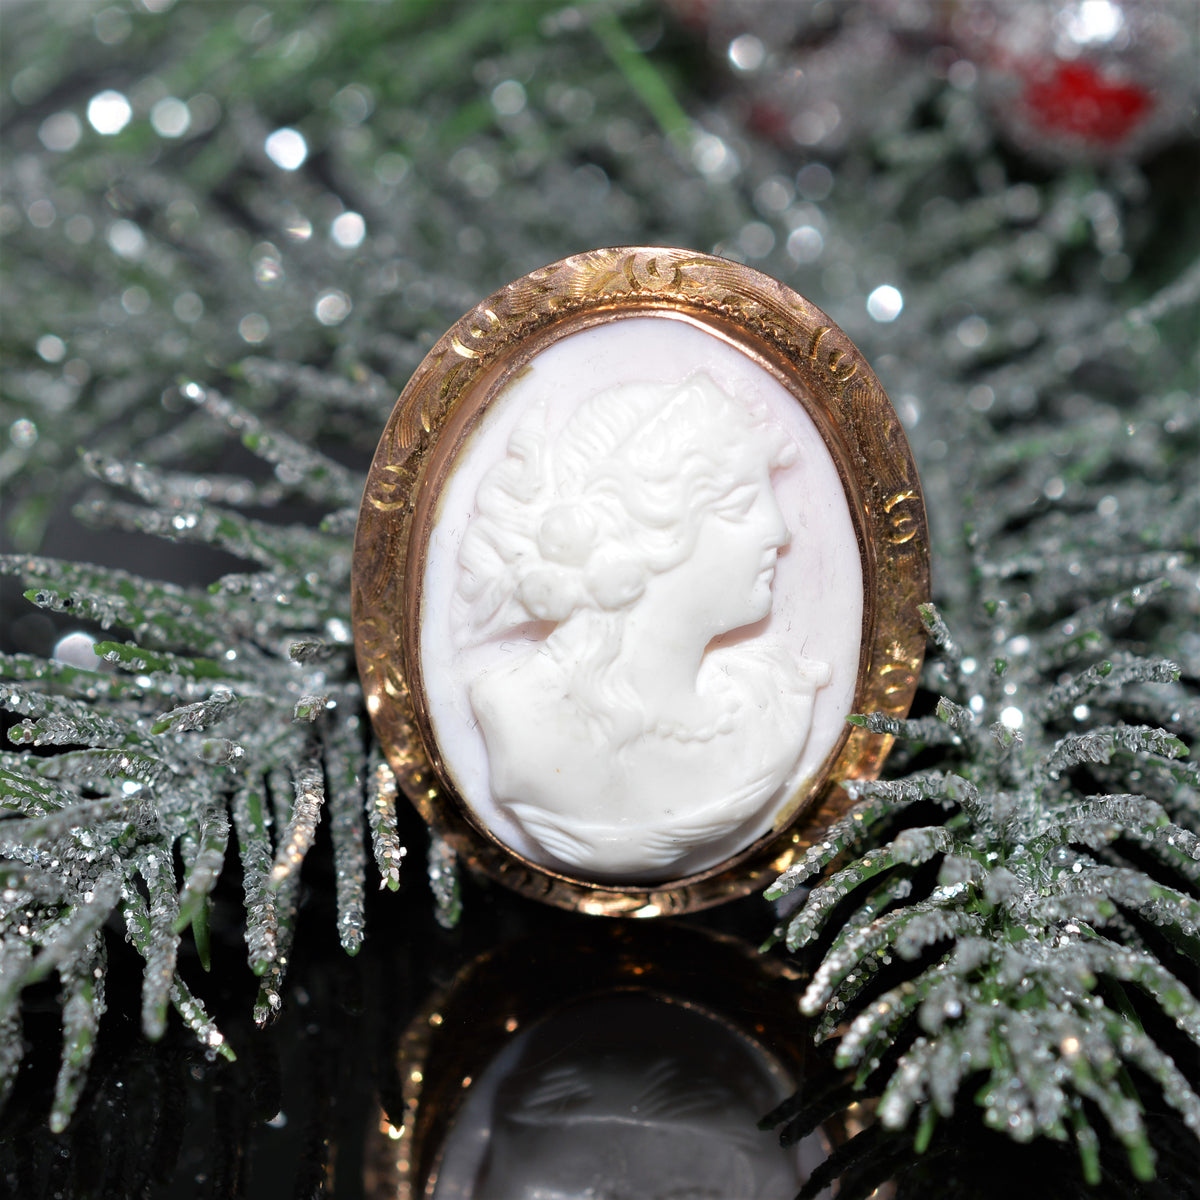 Antique Cameo Gold Brooch/Pendant with Engraved Frame